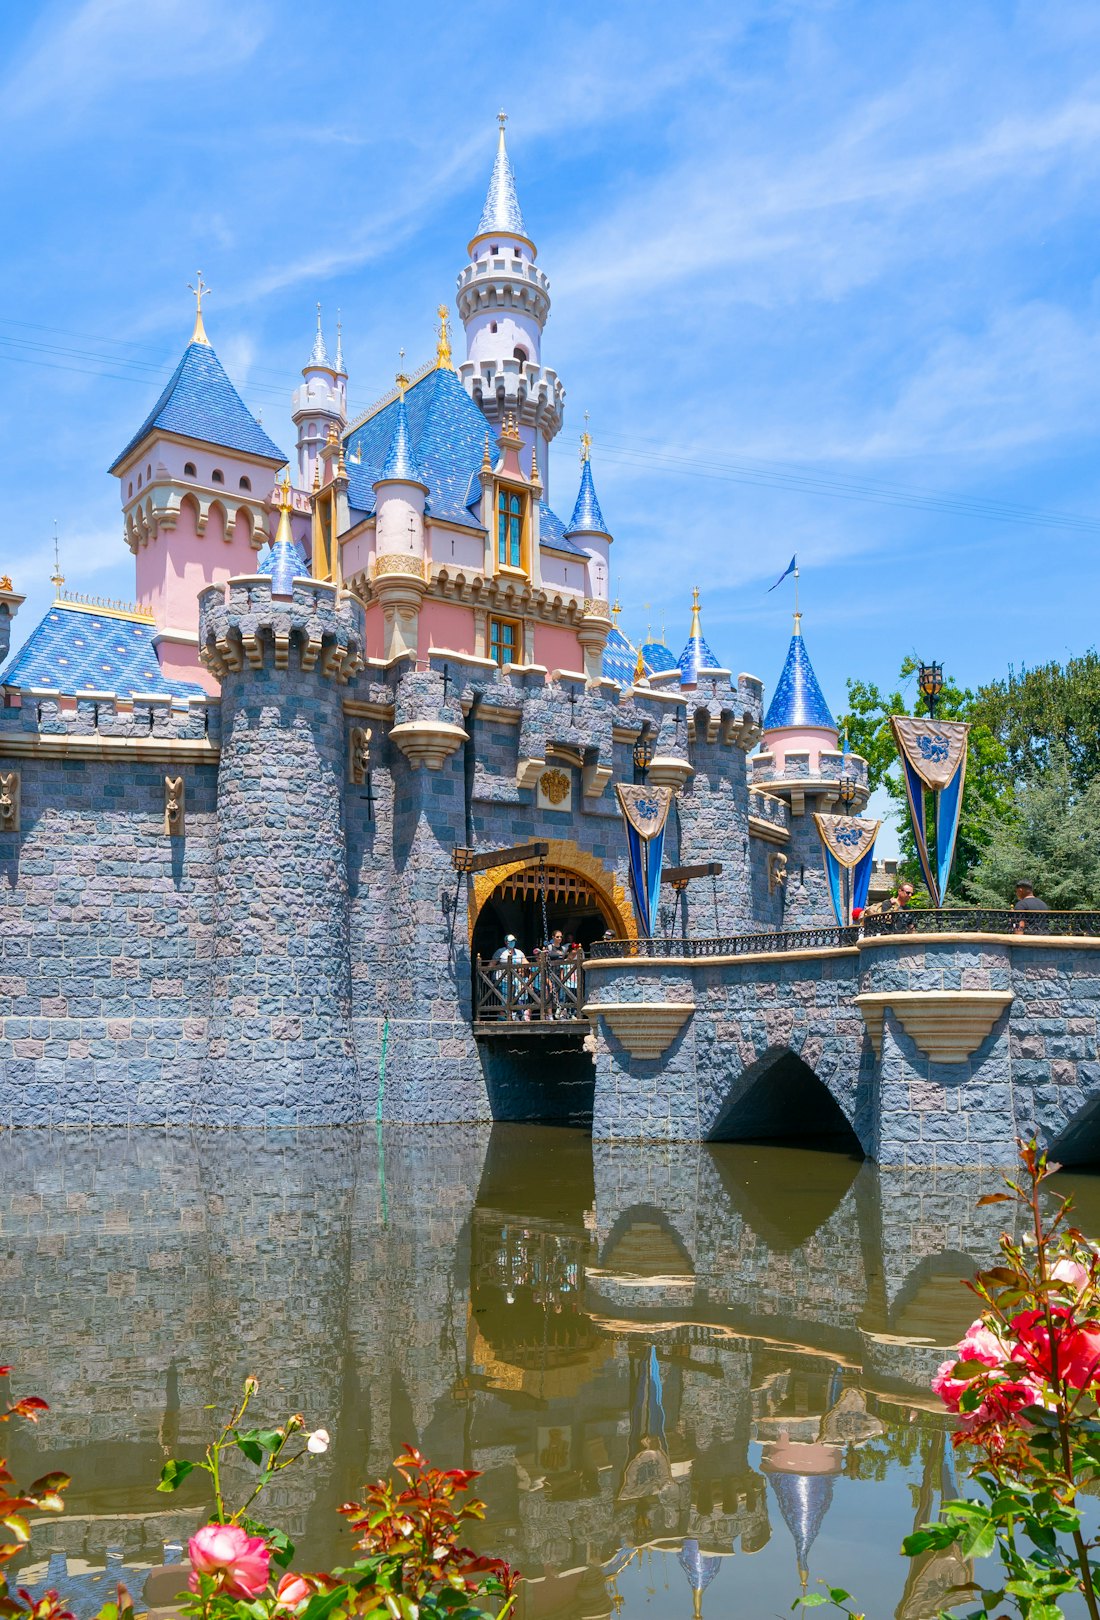 ANAHEIM, CA - MAY 27: General views of Sleeping Beauty Castle at Disneyland on May 27, 2022 in Anahe...